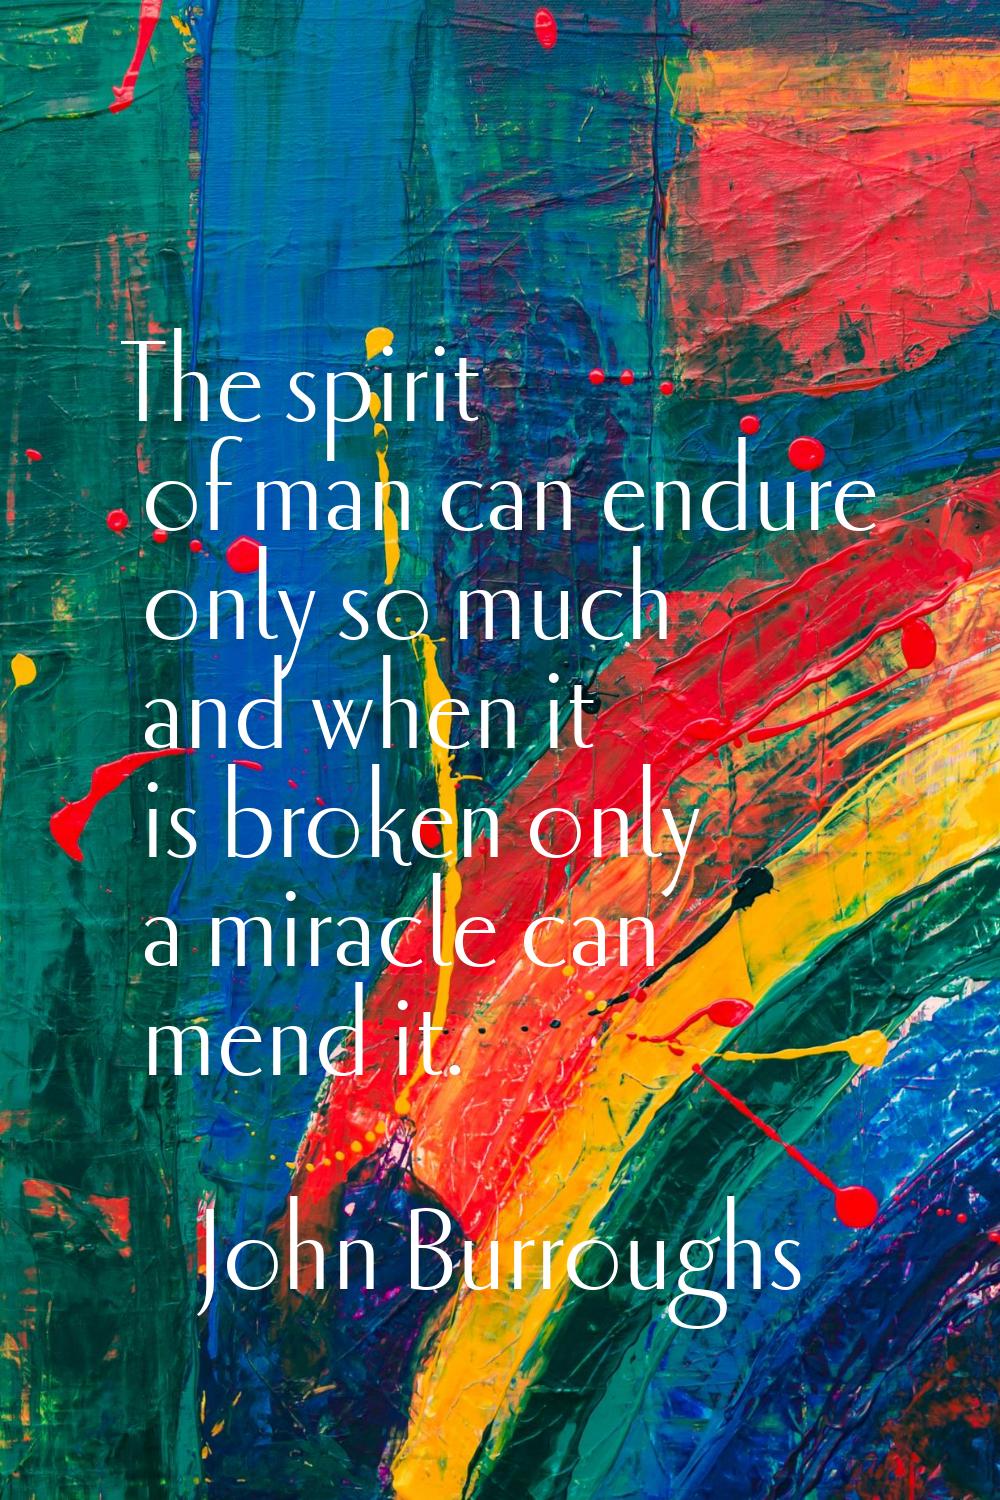 The spirit of man can endure only so much and when it is broken only a miracle can mend it.